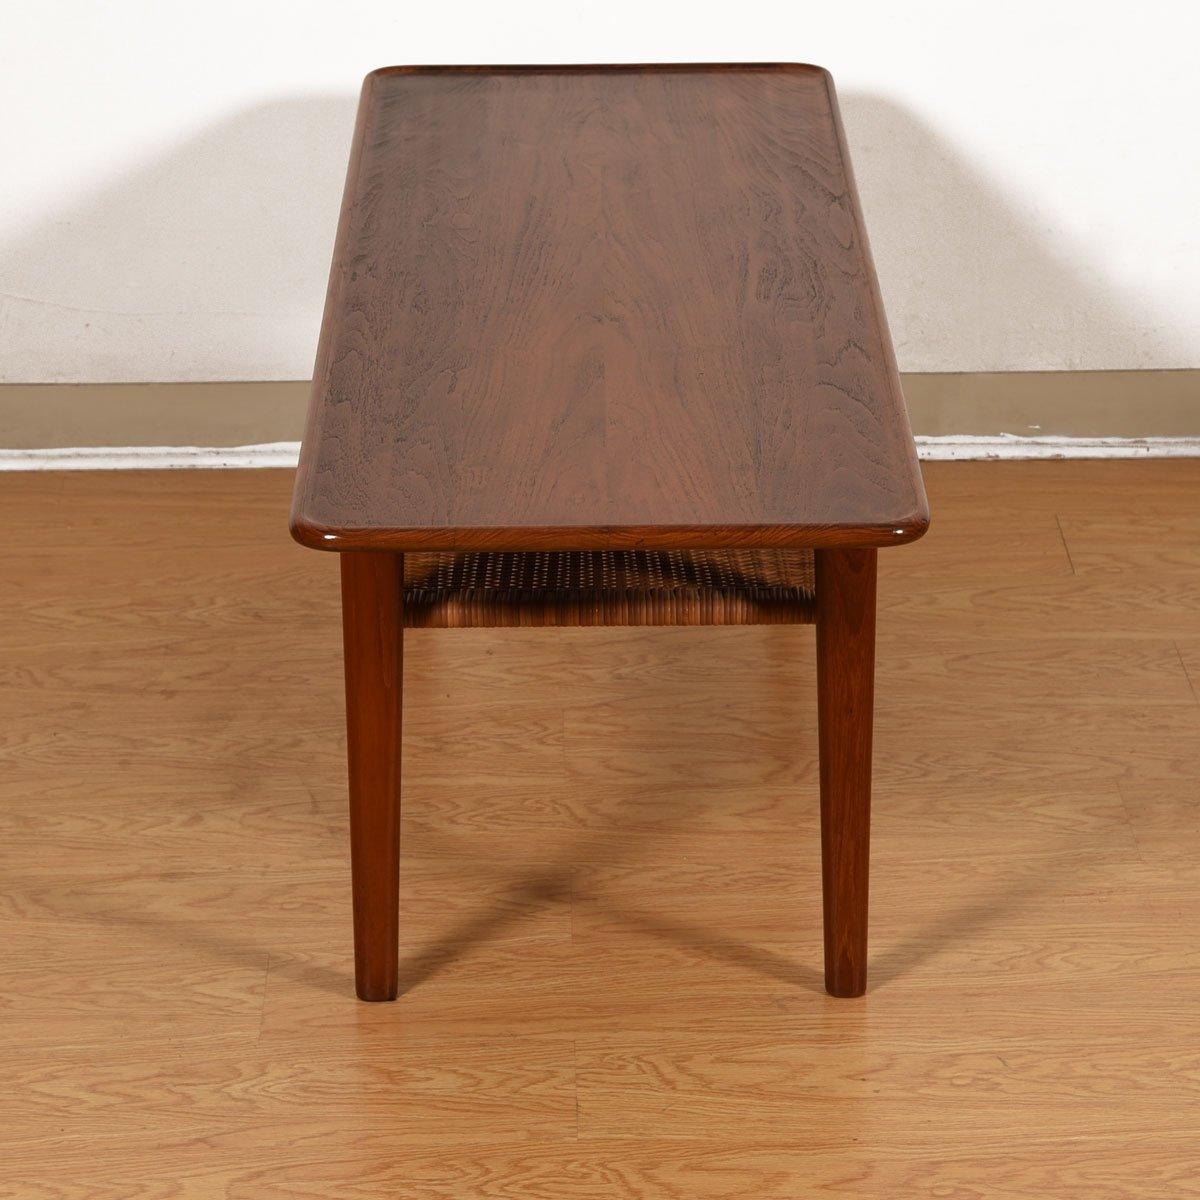 Danish Teak Coffee Table by Hans Wegner for Andreas Tuck In Excellent Condition For Sale In Kensington, MD